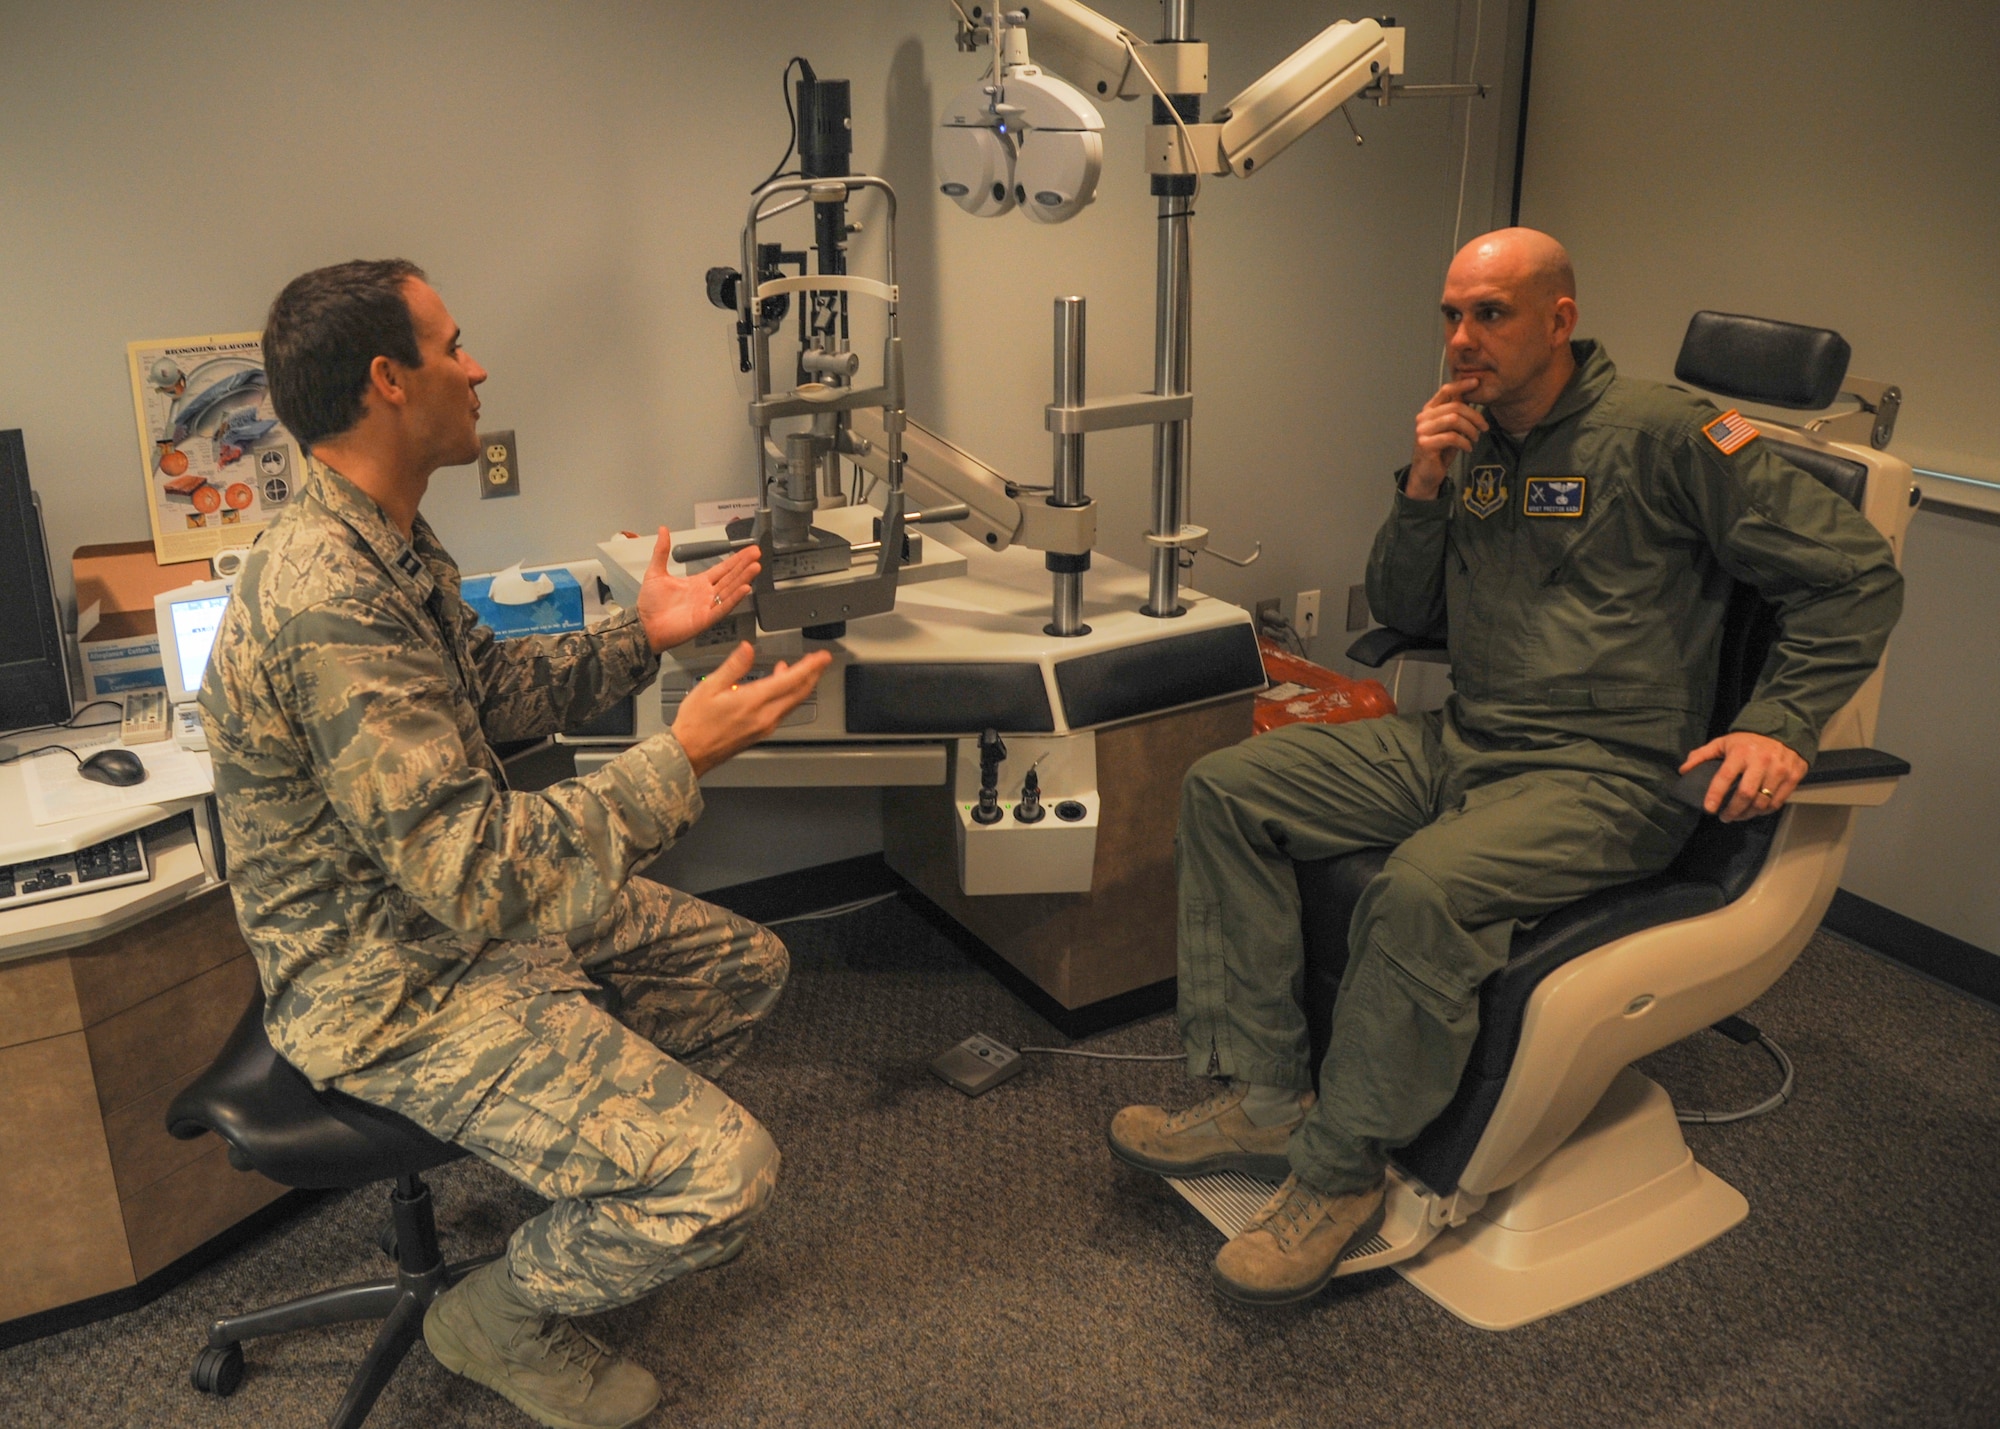 Capt. Cody Peterson, a 19th Aerospace Medicine Squadron optometrist, explains the importance of wearing glasses to Master Sgt. Preston Kash, a 22nd Air Force Det. 1 flight engineer, June 30, 2014, at Little Rock Air Force Base, Ark. Peterson and his team perform up to 140 eye examinations each week. (U.S. Air Force photo by Airman 1st Class Harry Brexel)